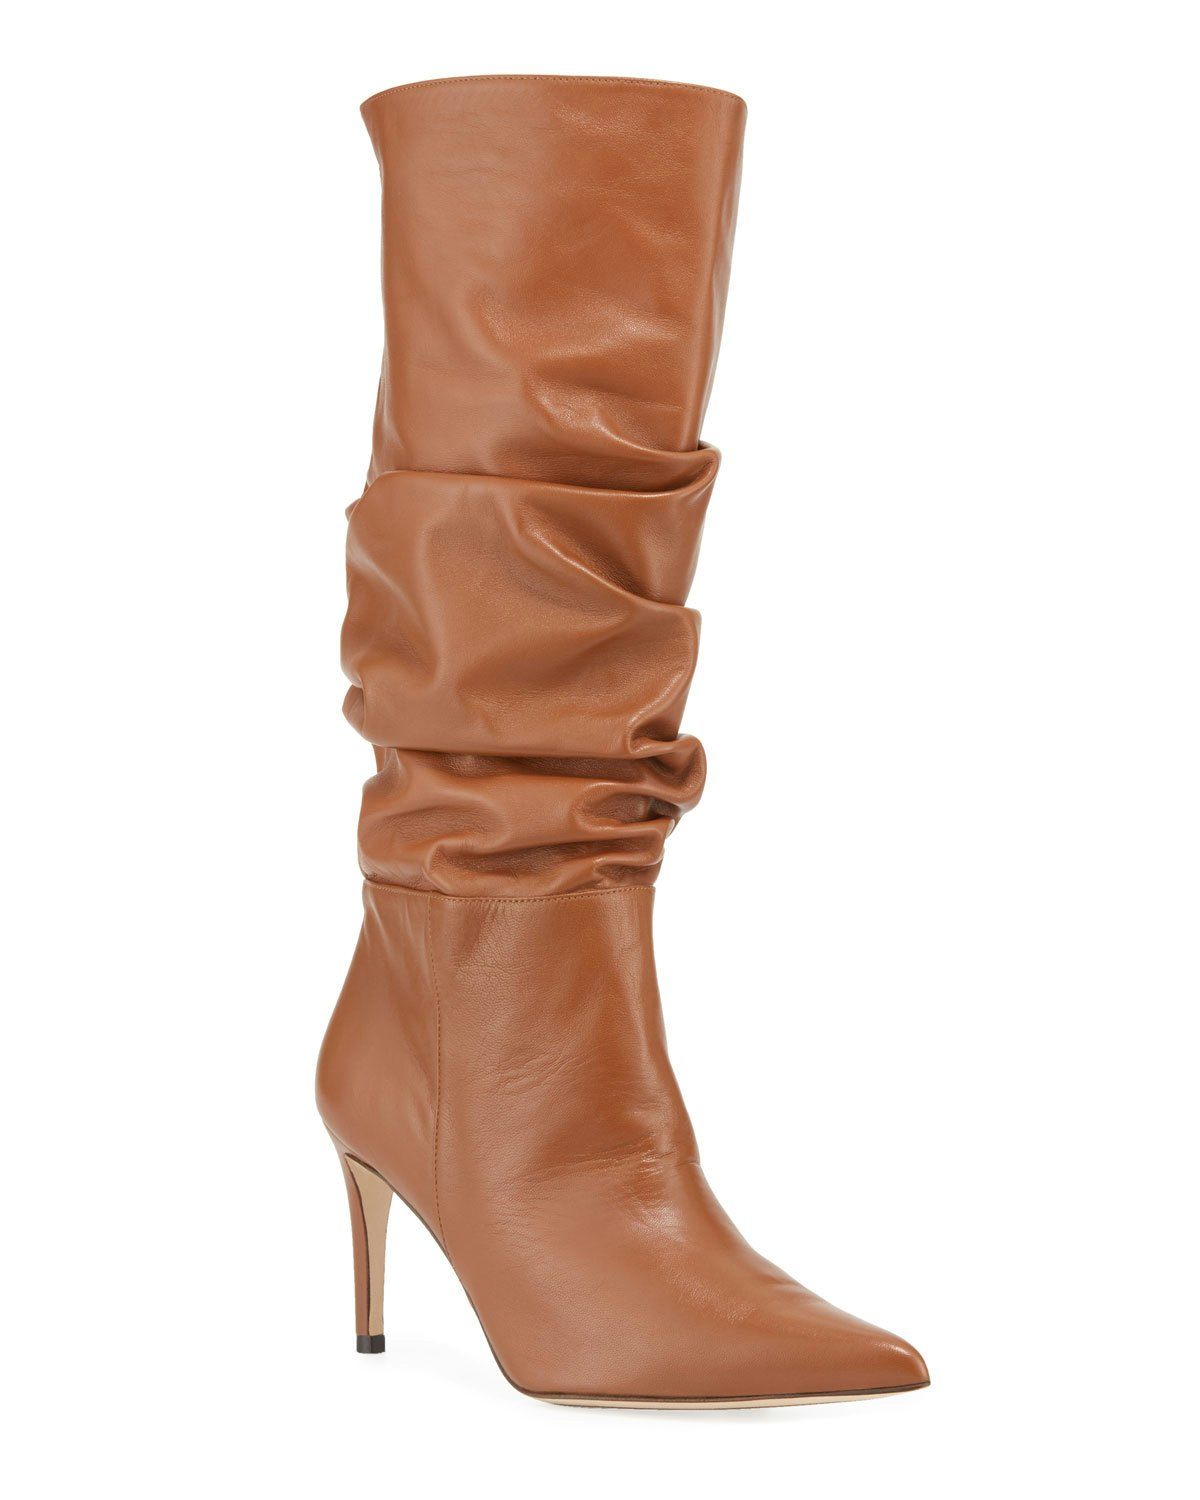 slouch boots trend 219